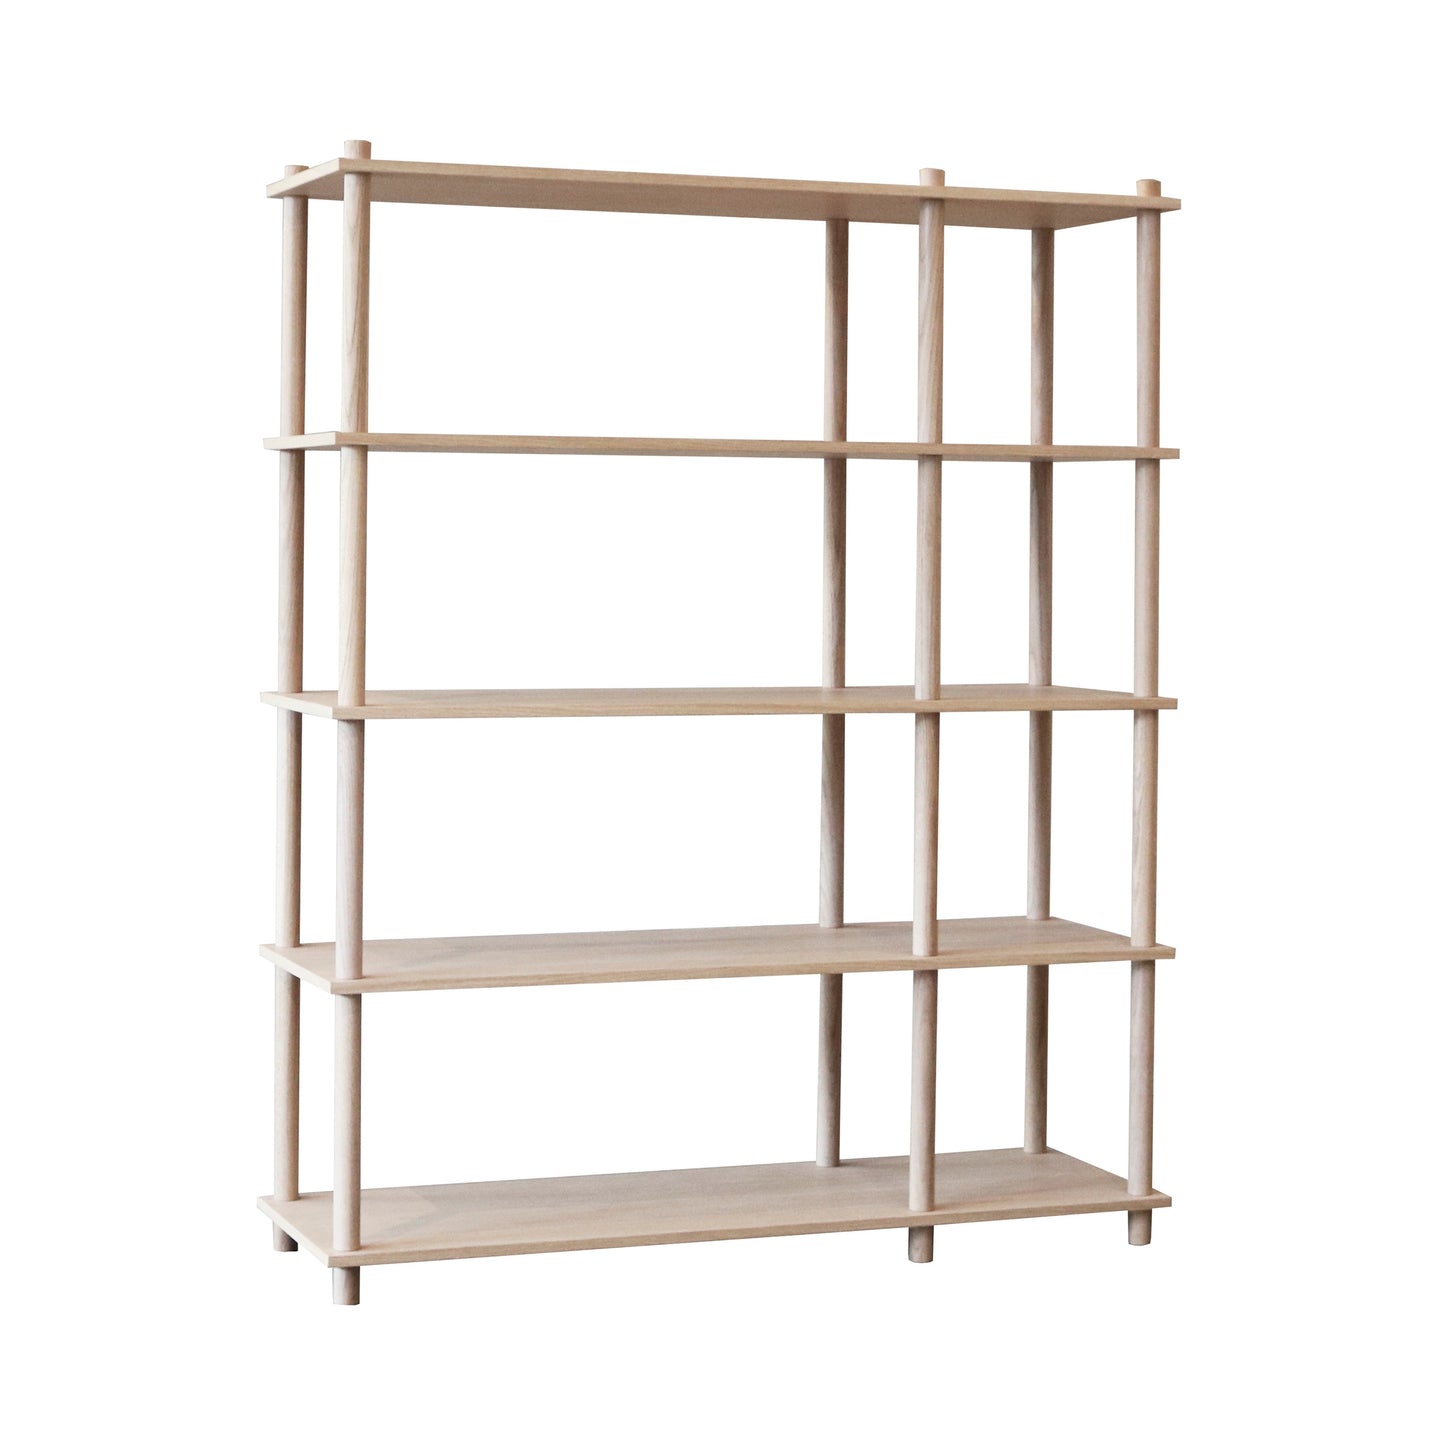 Elevate Shelving - System 9 by Woud